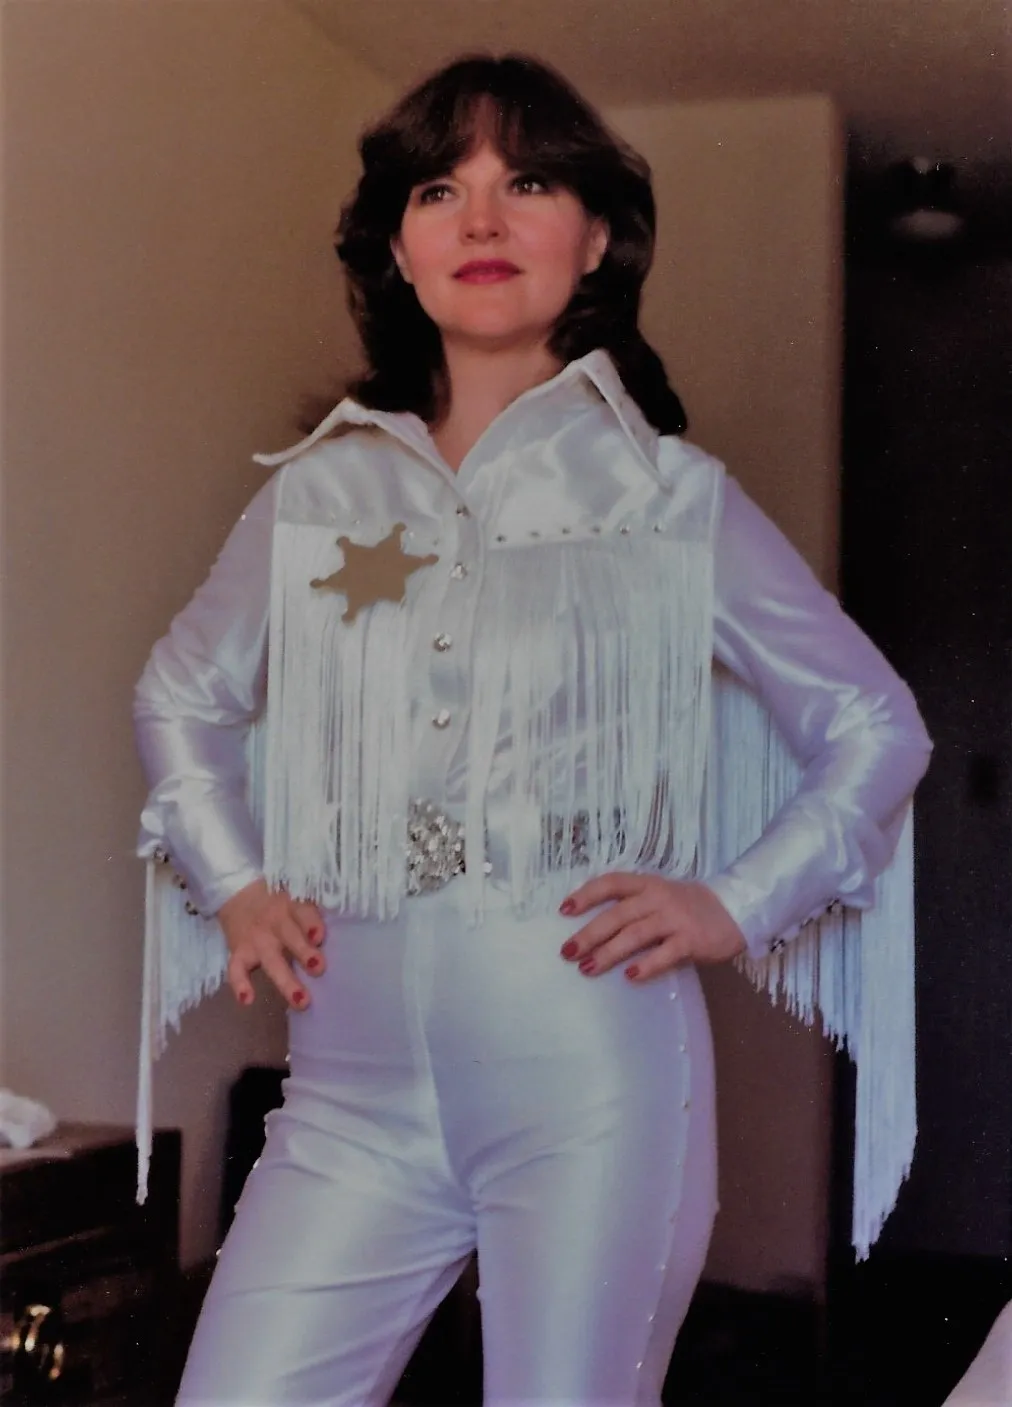 A woman in white outfit with star on chest.